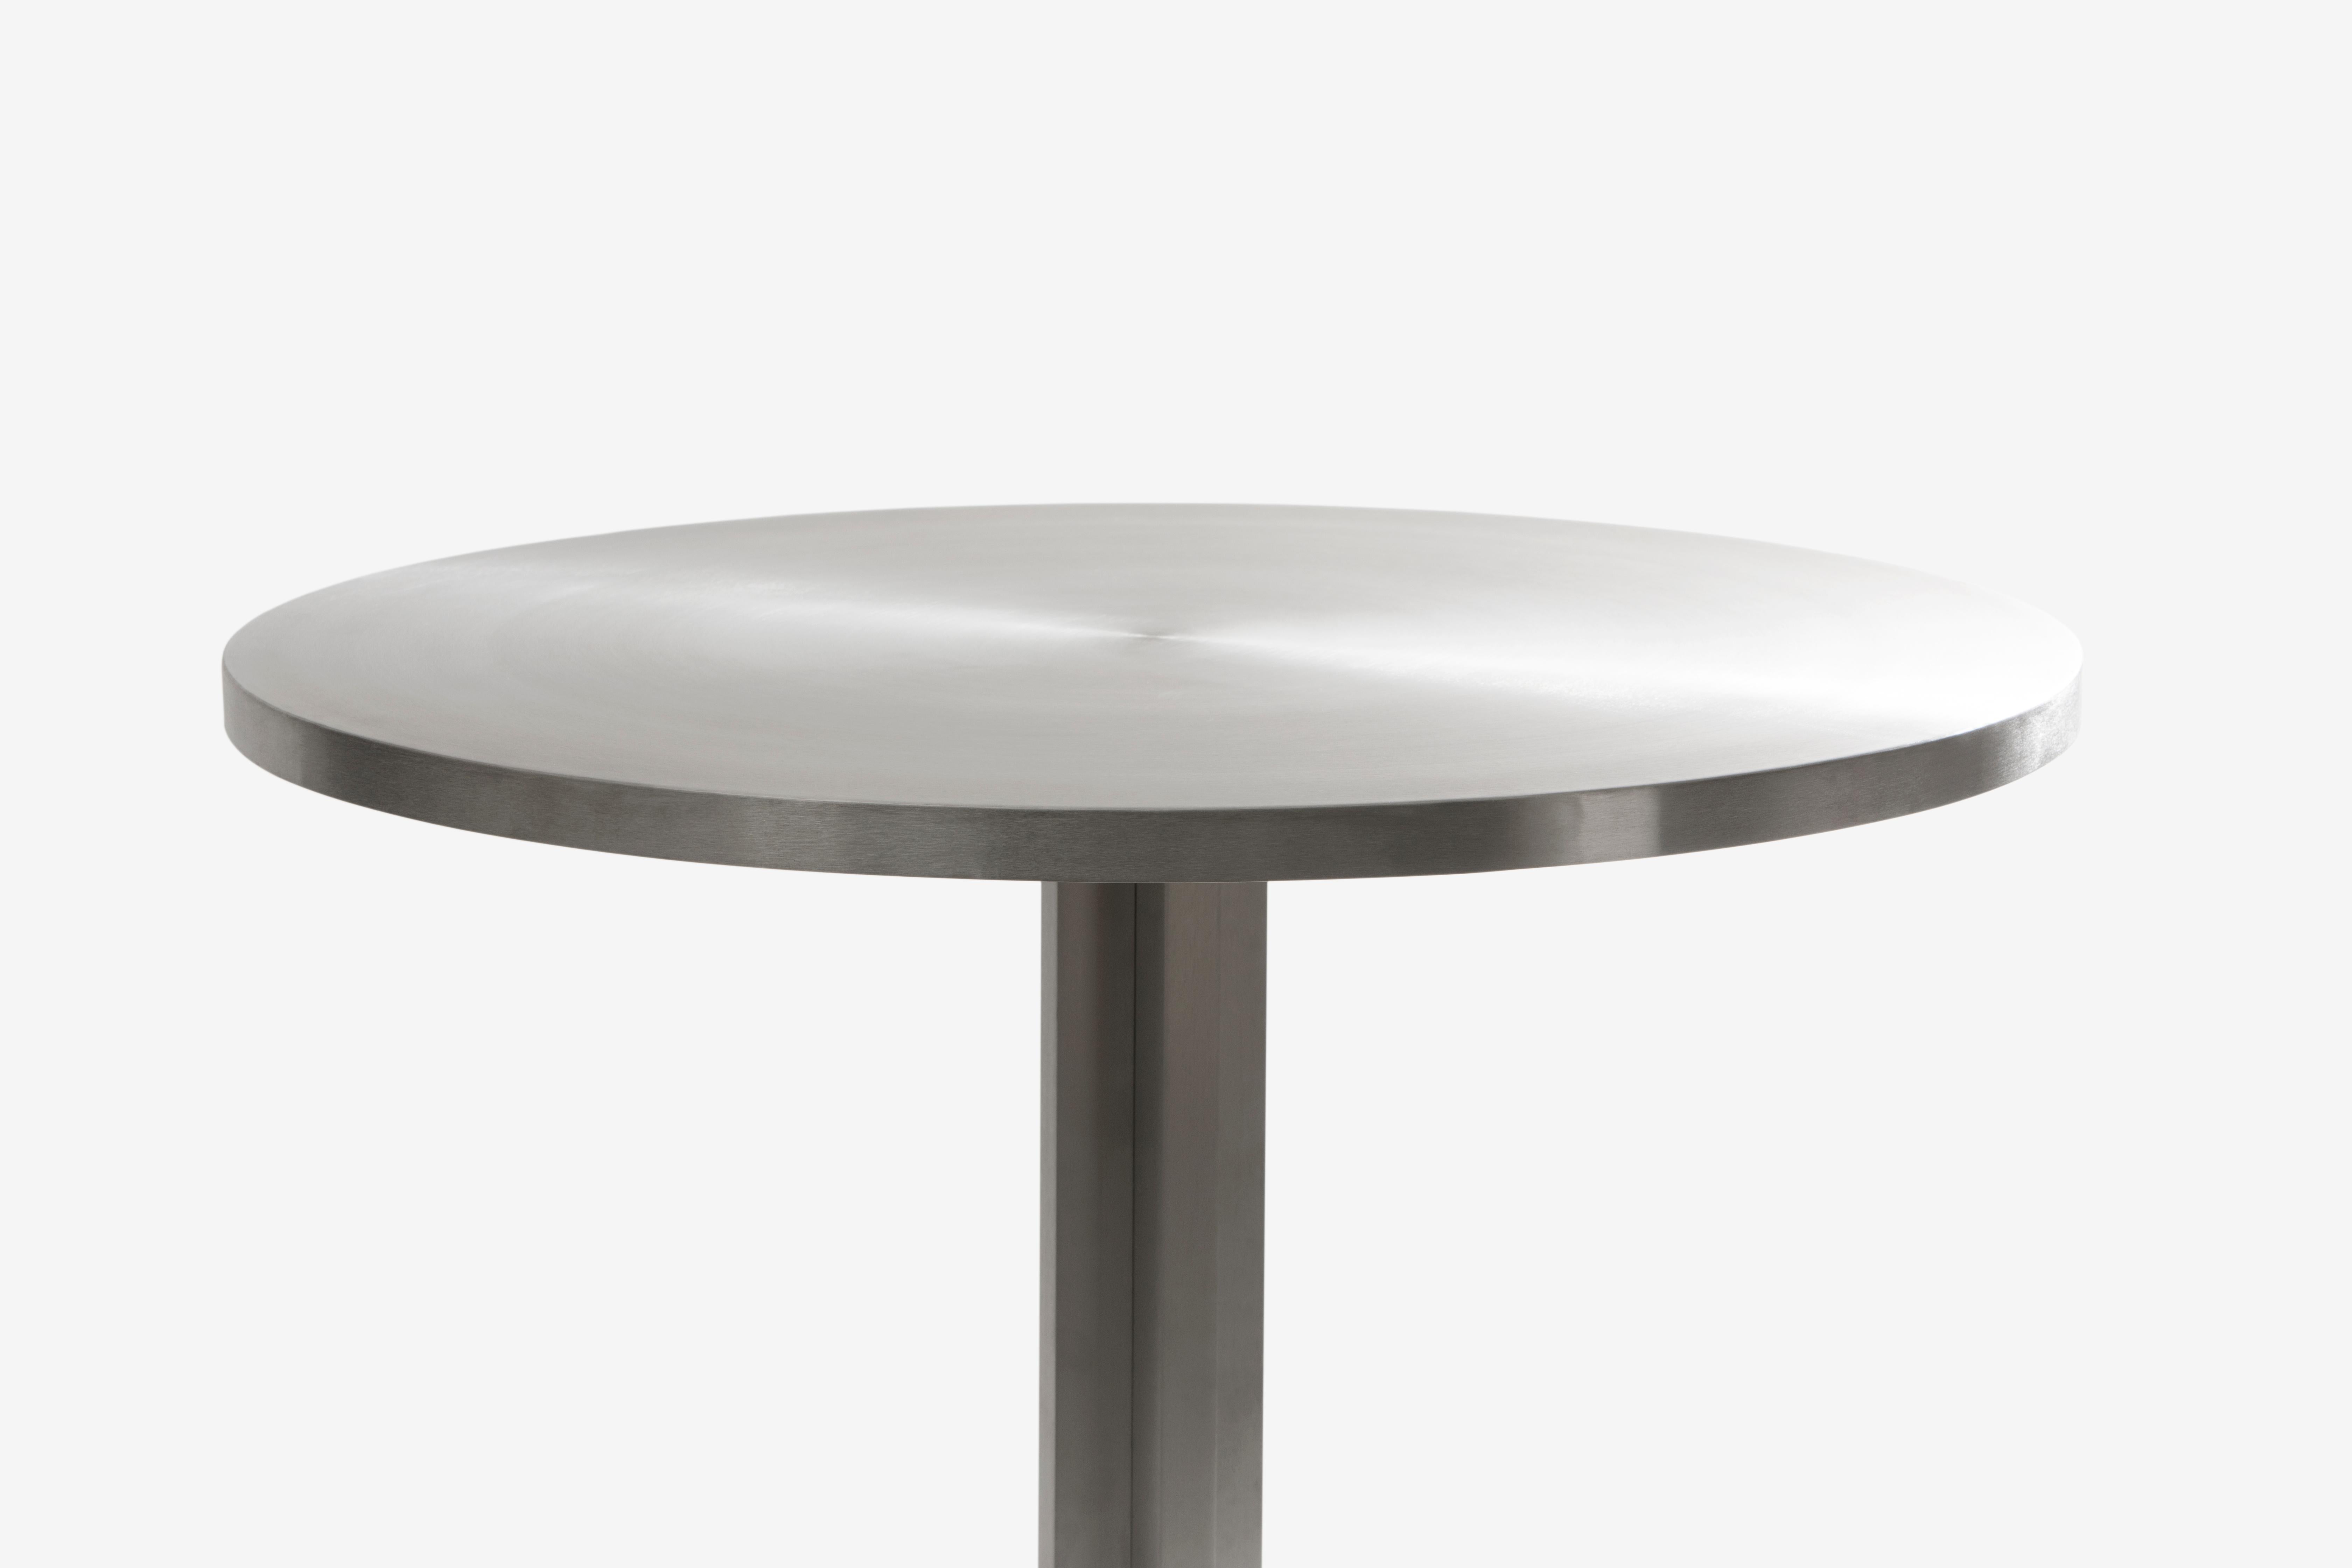 Alumina Round Table by Studio Gameiro
Round and round it goes. 
So goes the saying, and so did the drawing (and production go). 
By keeping it linear and geometric to the point, Studio Gameiro’s aluminium table has an improbable dialogue, at odds